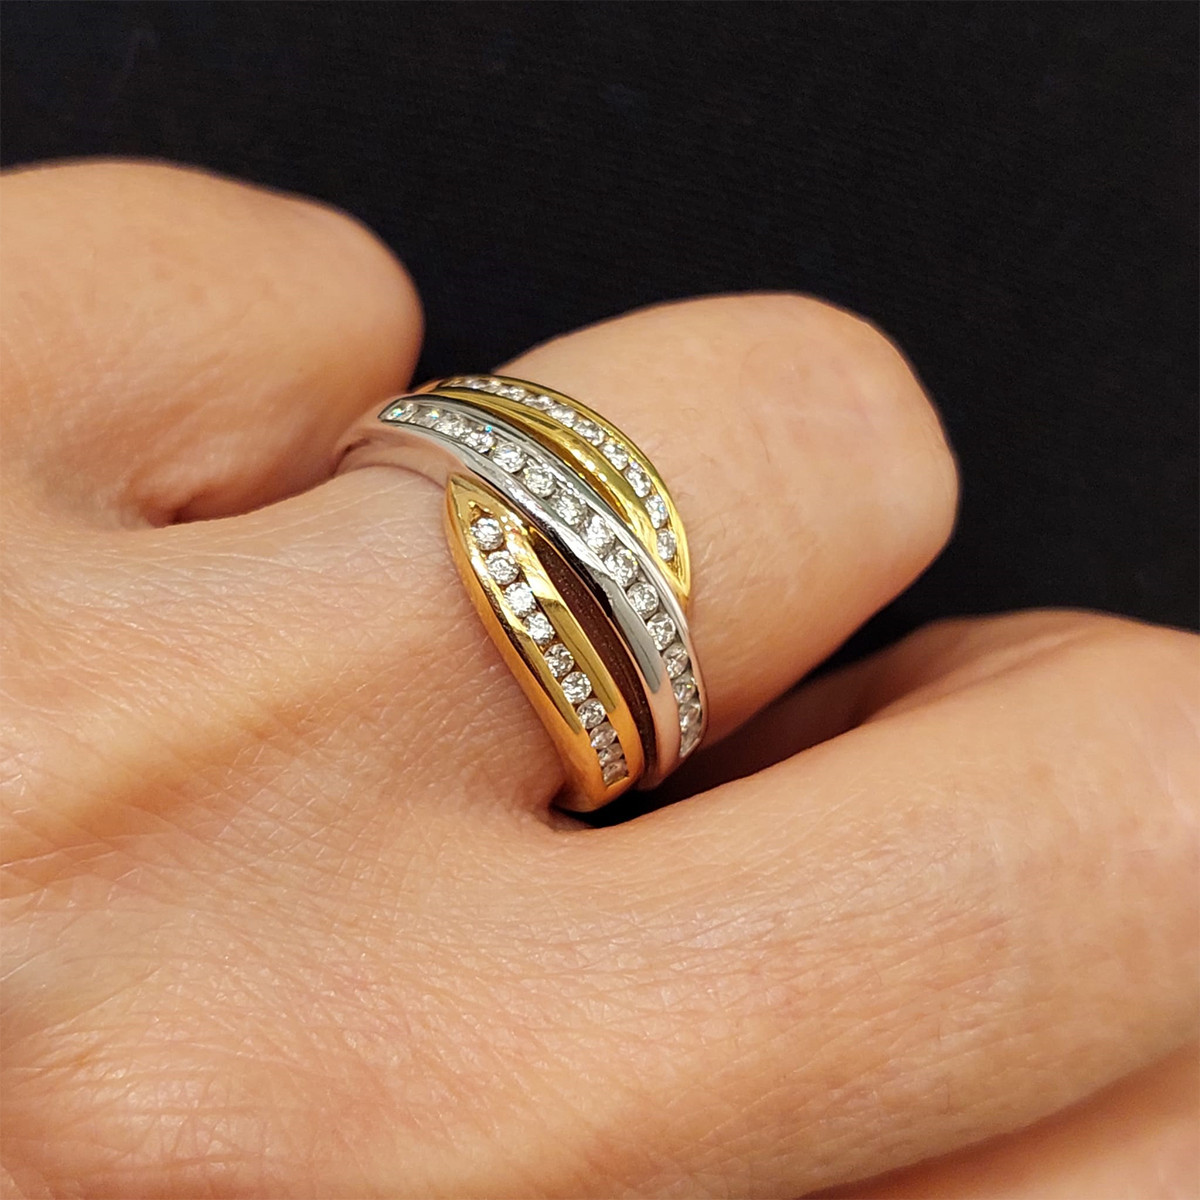 3 COLORS GOLD RING WITH DIAMONDS